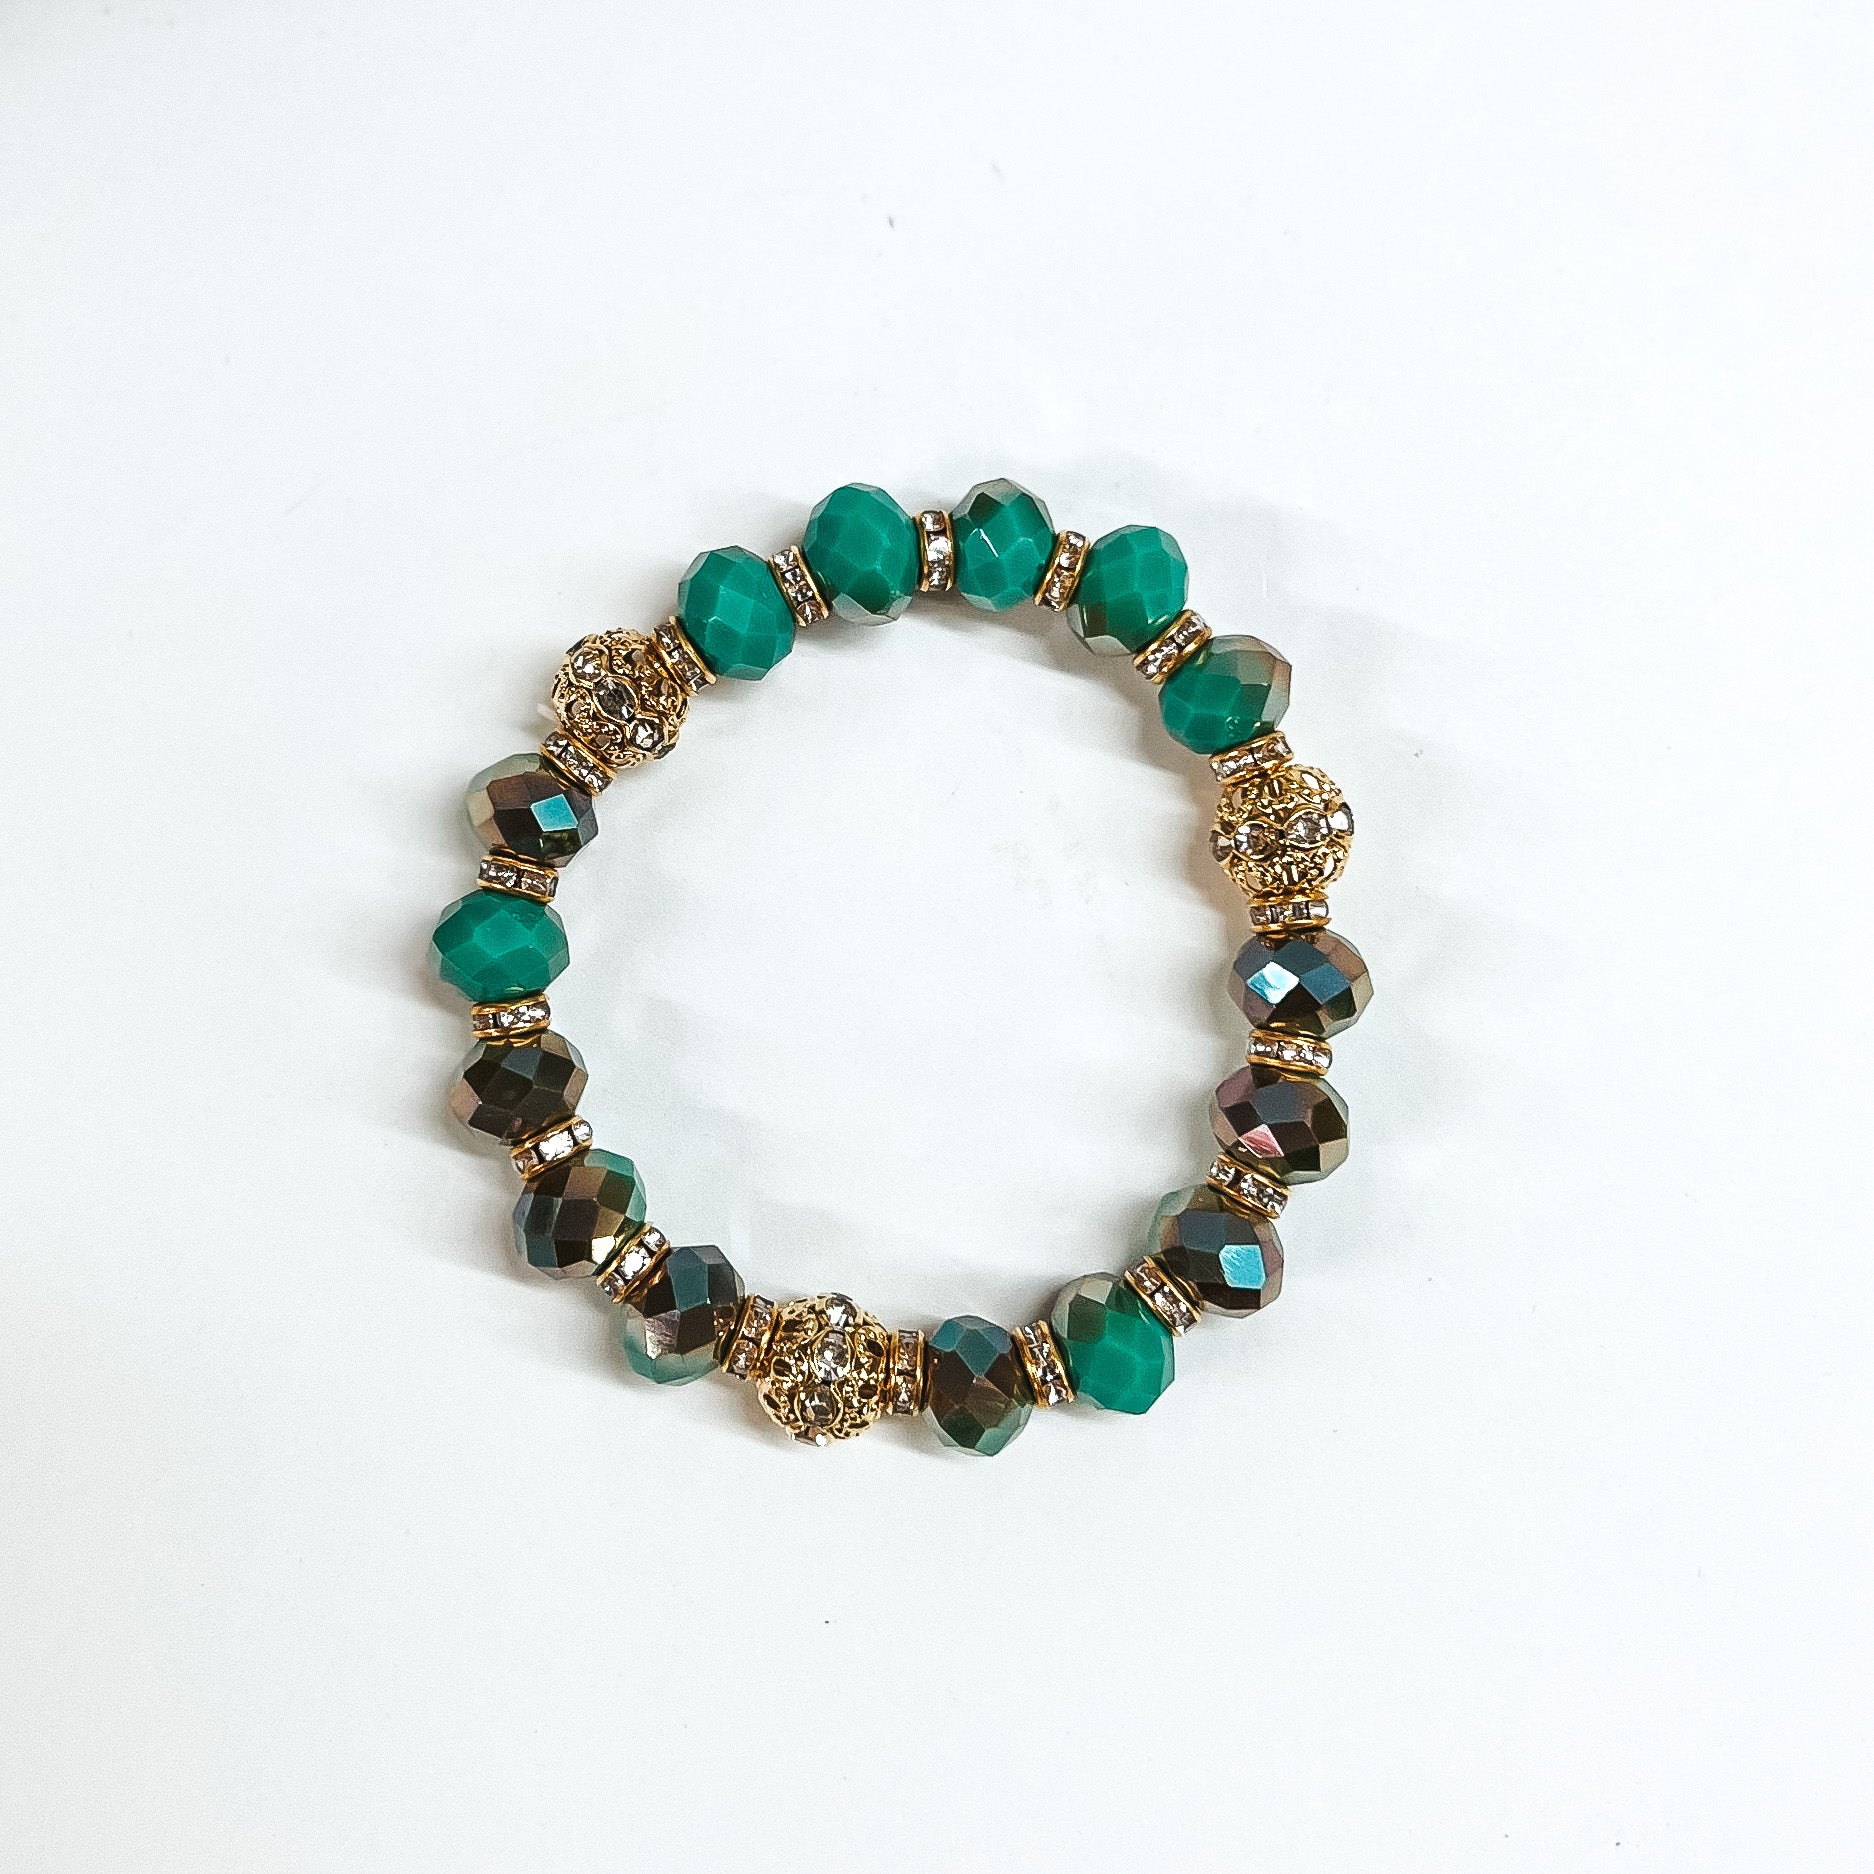 This is green/teal mix crystal beaded bracelets with gold spacers.  The gold spacers have clear crystals in them and there are three gold and  crystals beads.This bracelet is taken on white background.